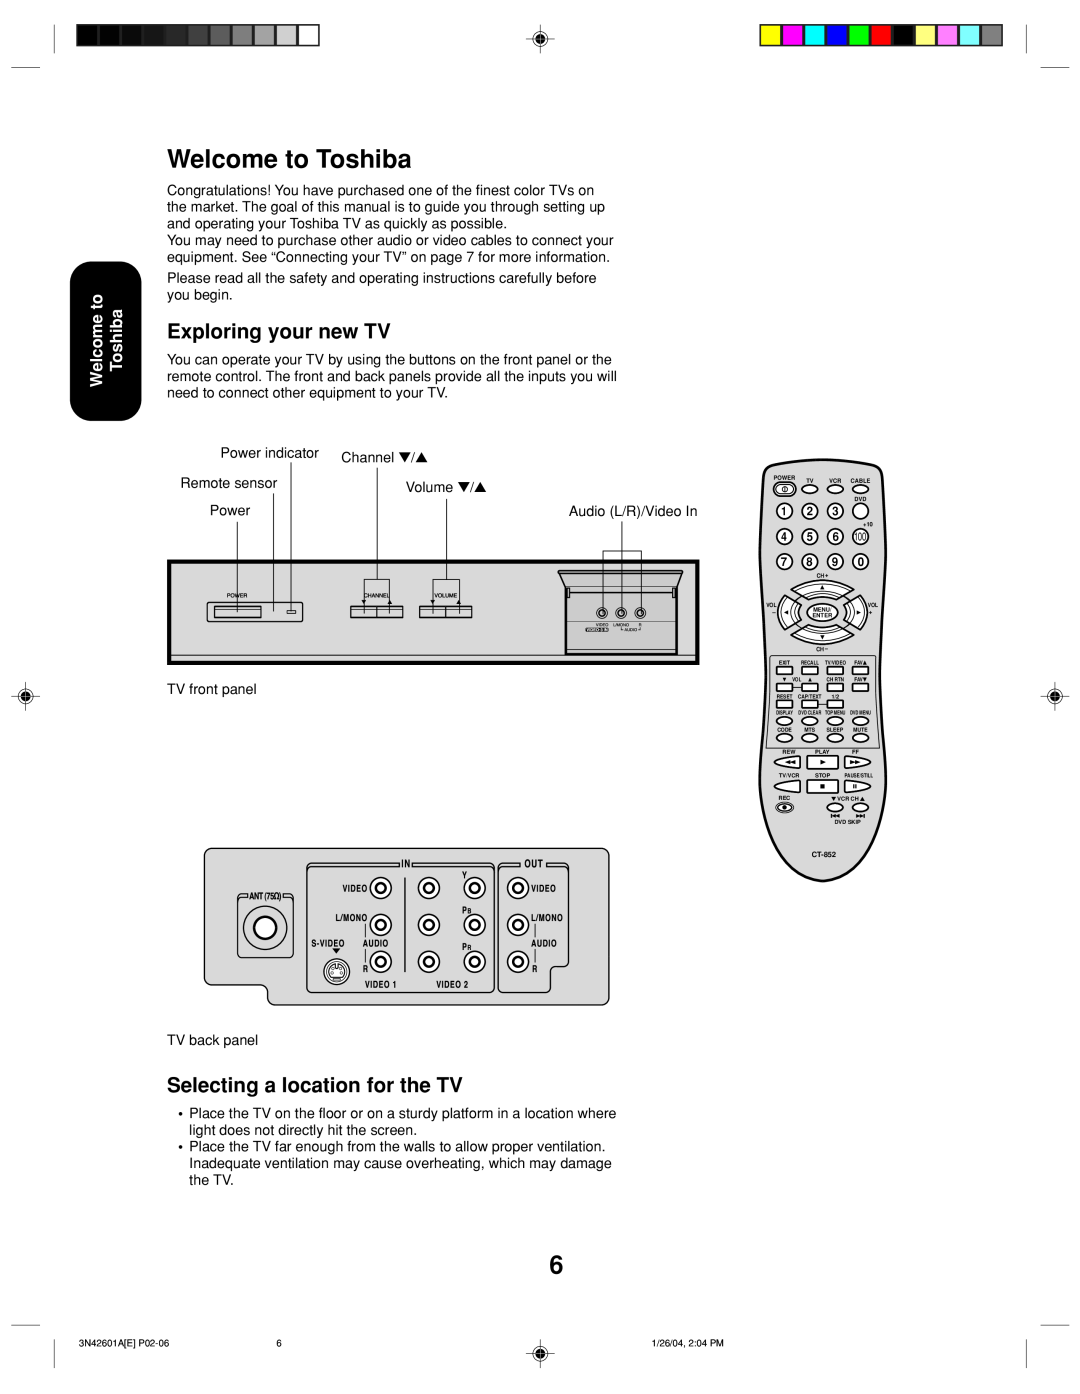 Toshiba 27A44 appendix Welcome to Toshiba, Exploring your new TV, Selecting a location for the TV 